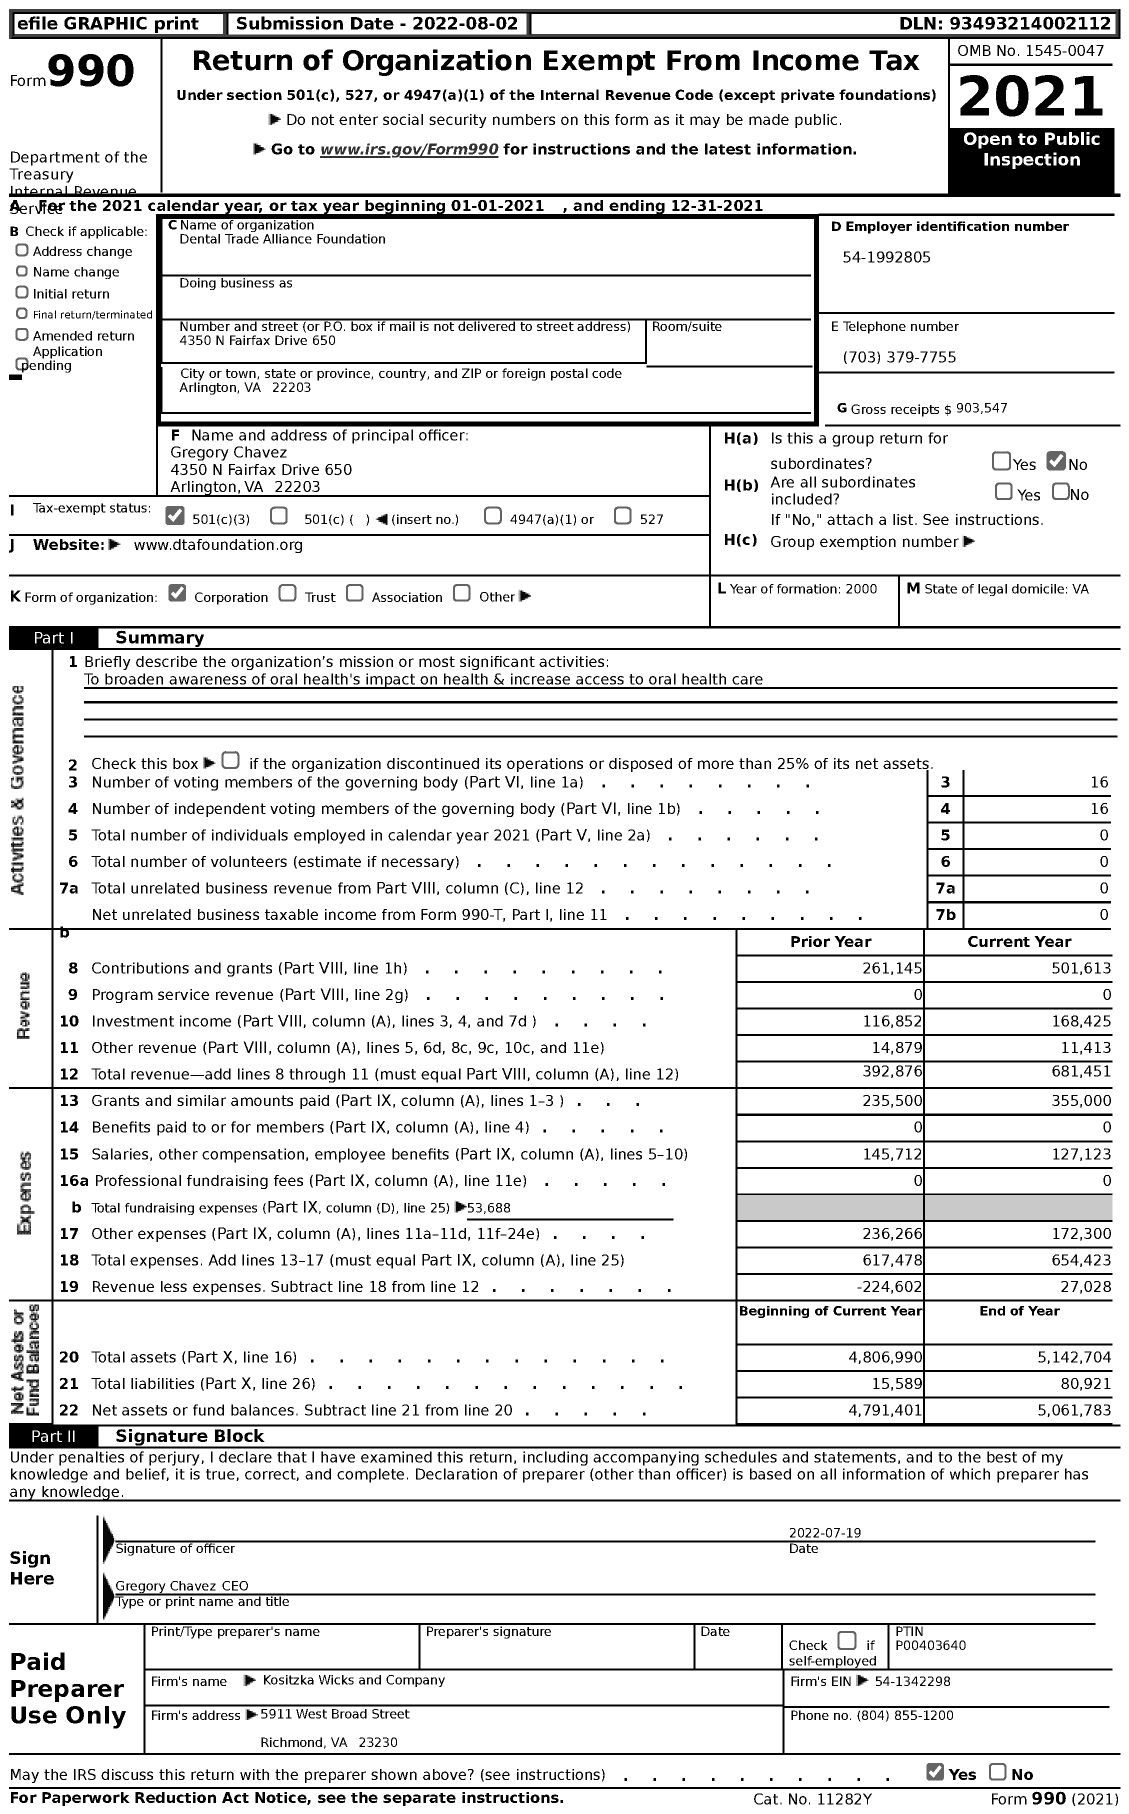 Image of first page of 2021 Form 990 for Dental Trade Alliance Foundation